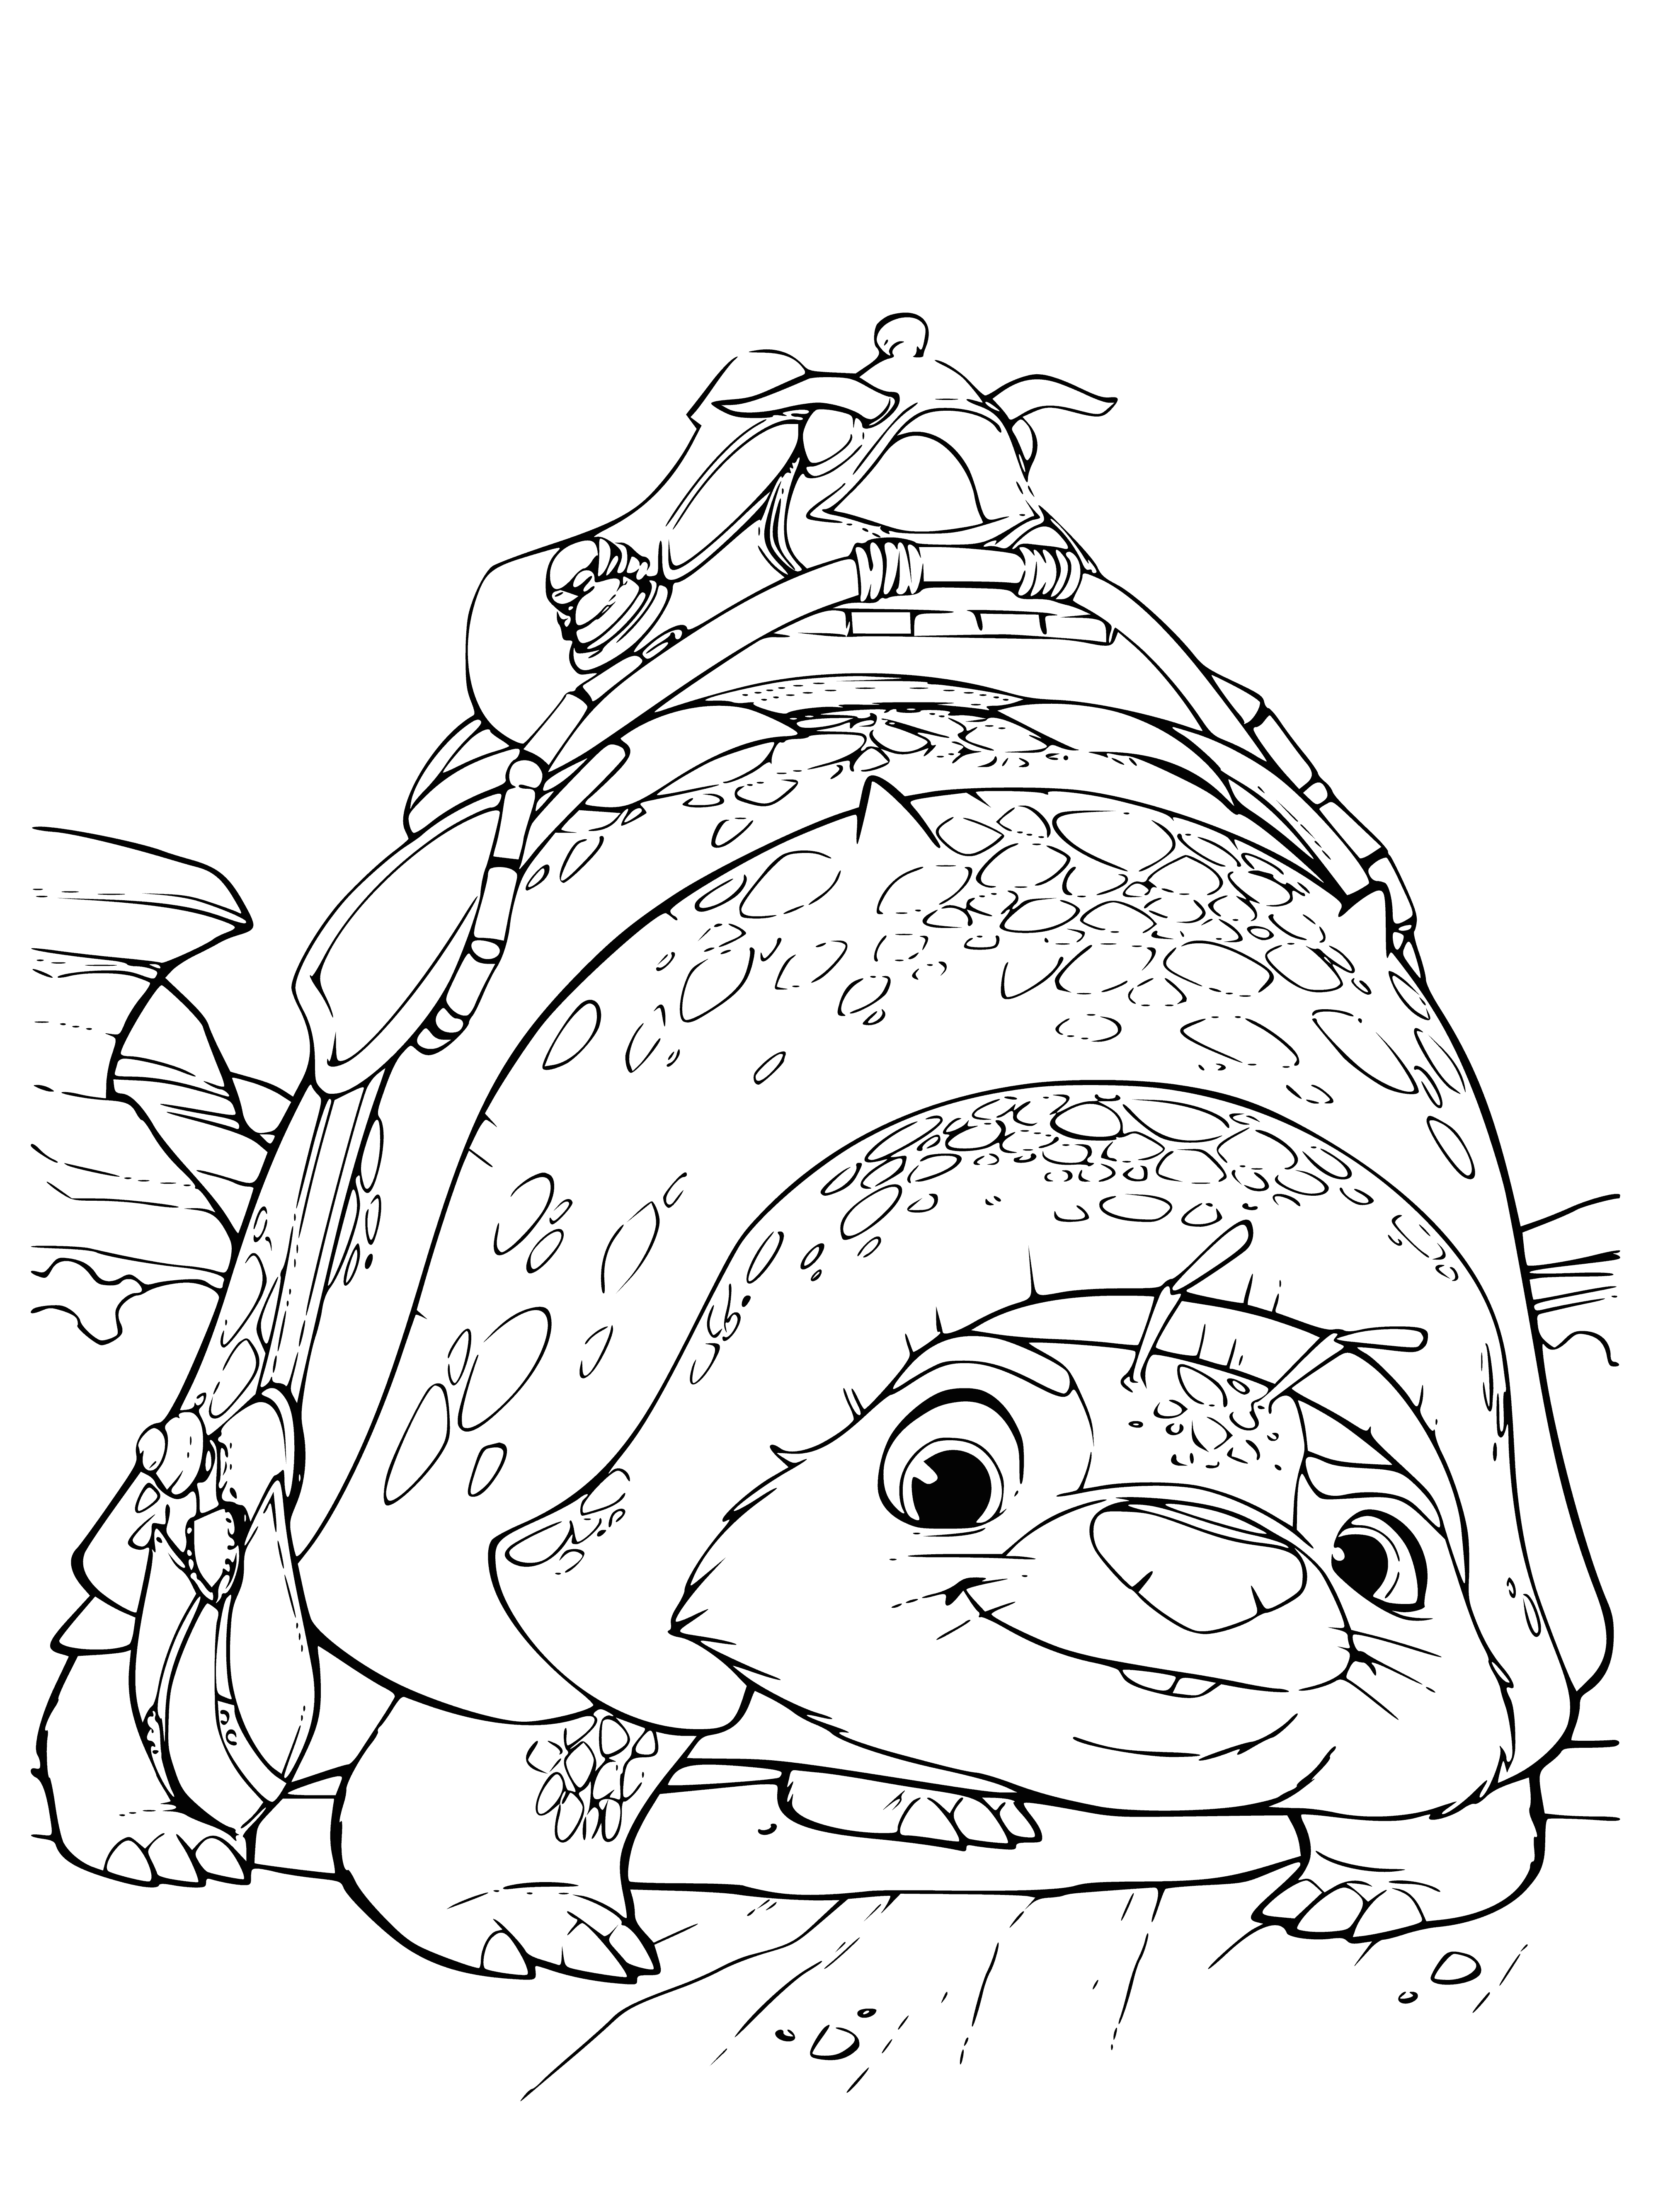 Here Here coloring page